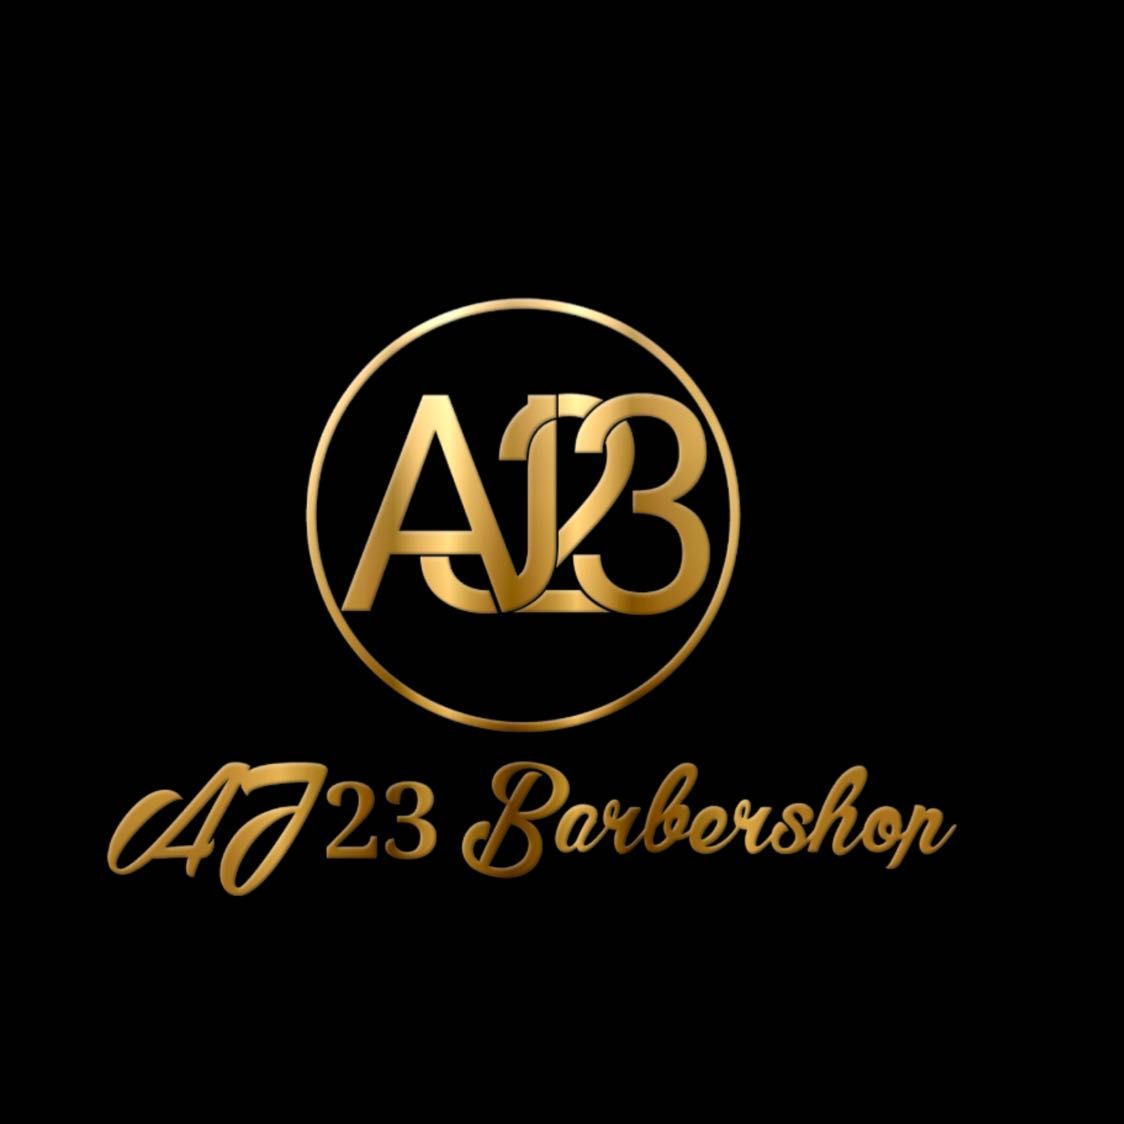 Aj23 barbershop, 2441 NW 43rd St, Gainesville, 32606